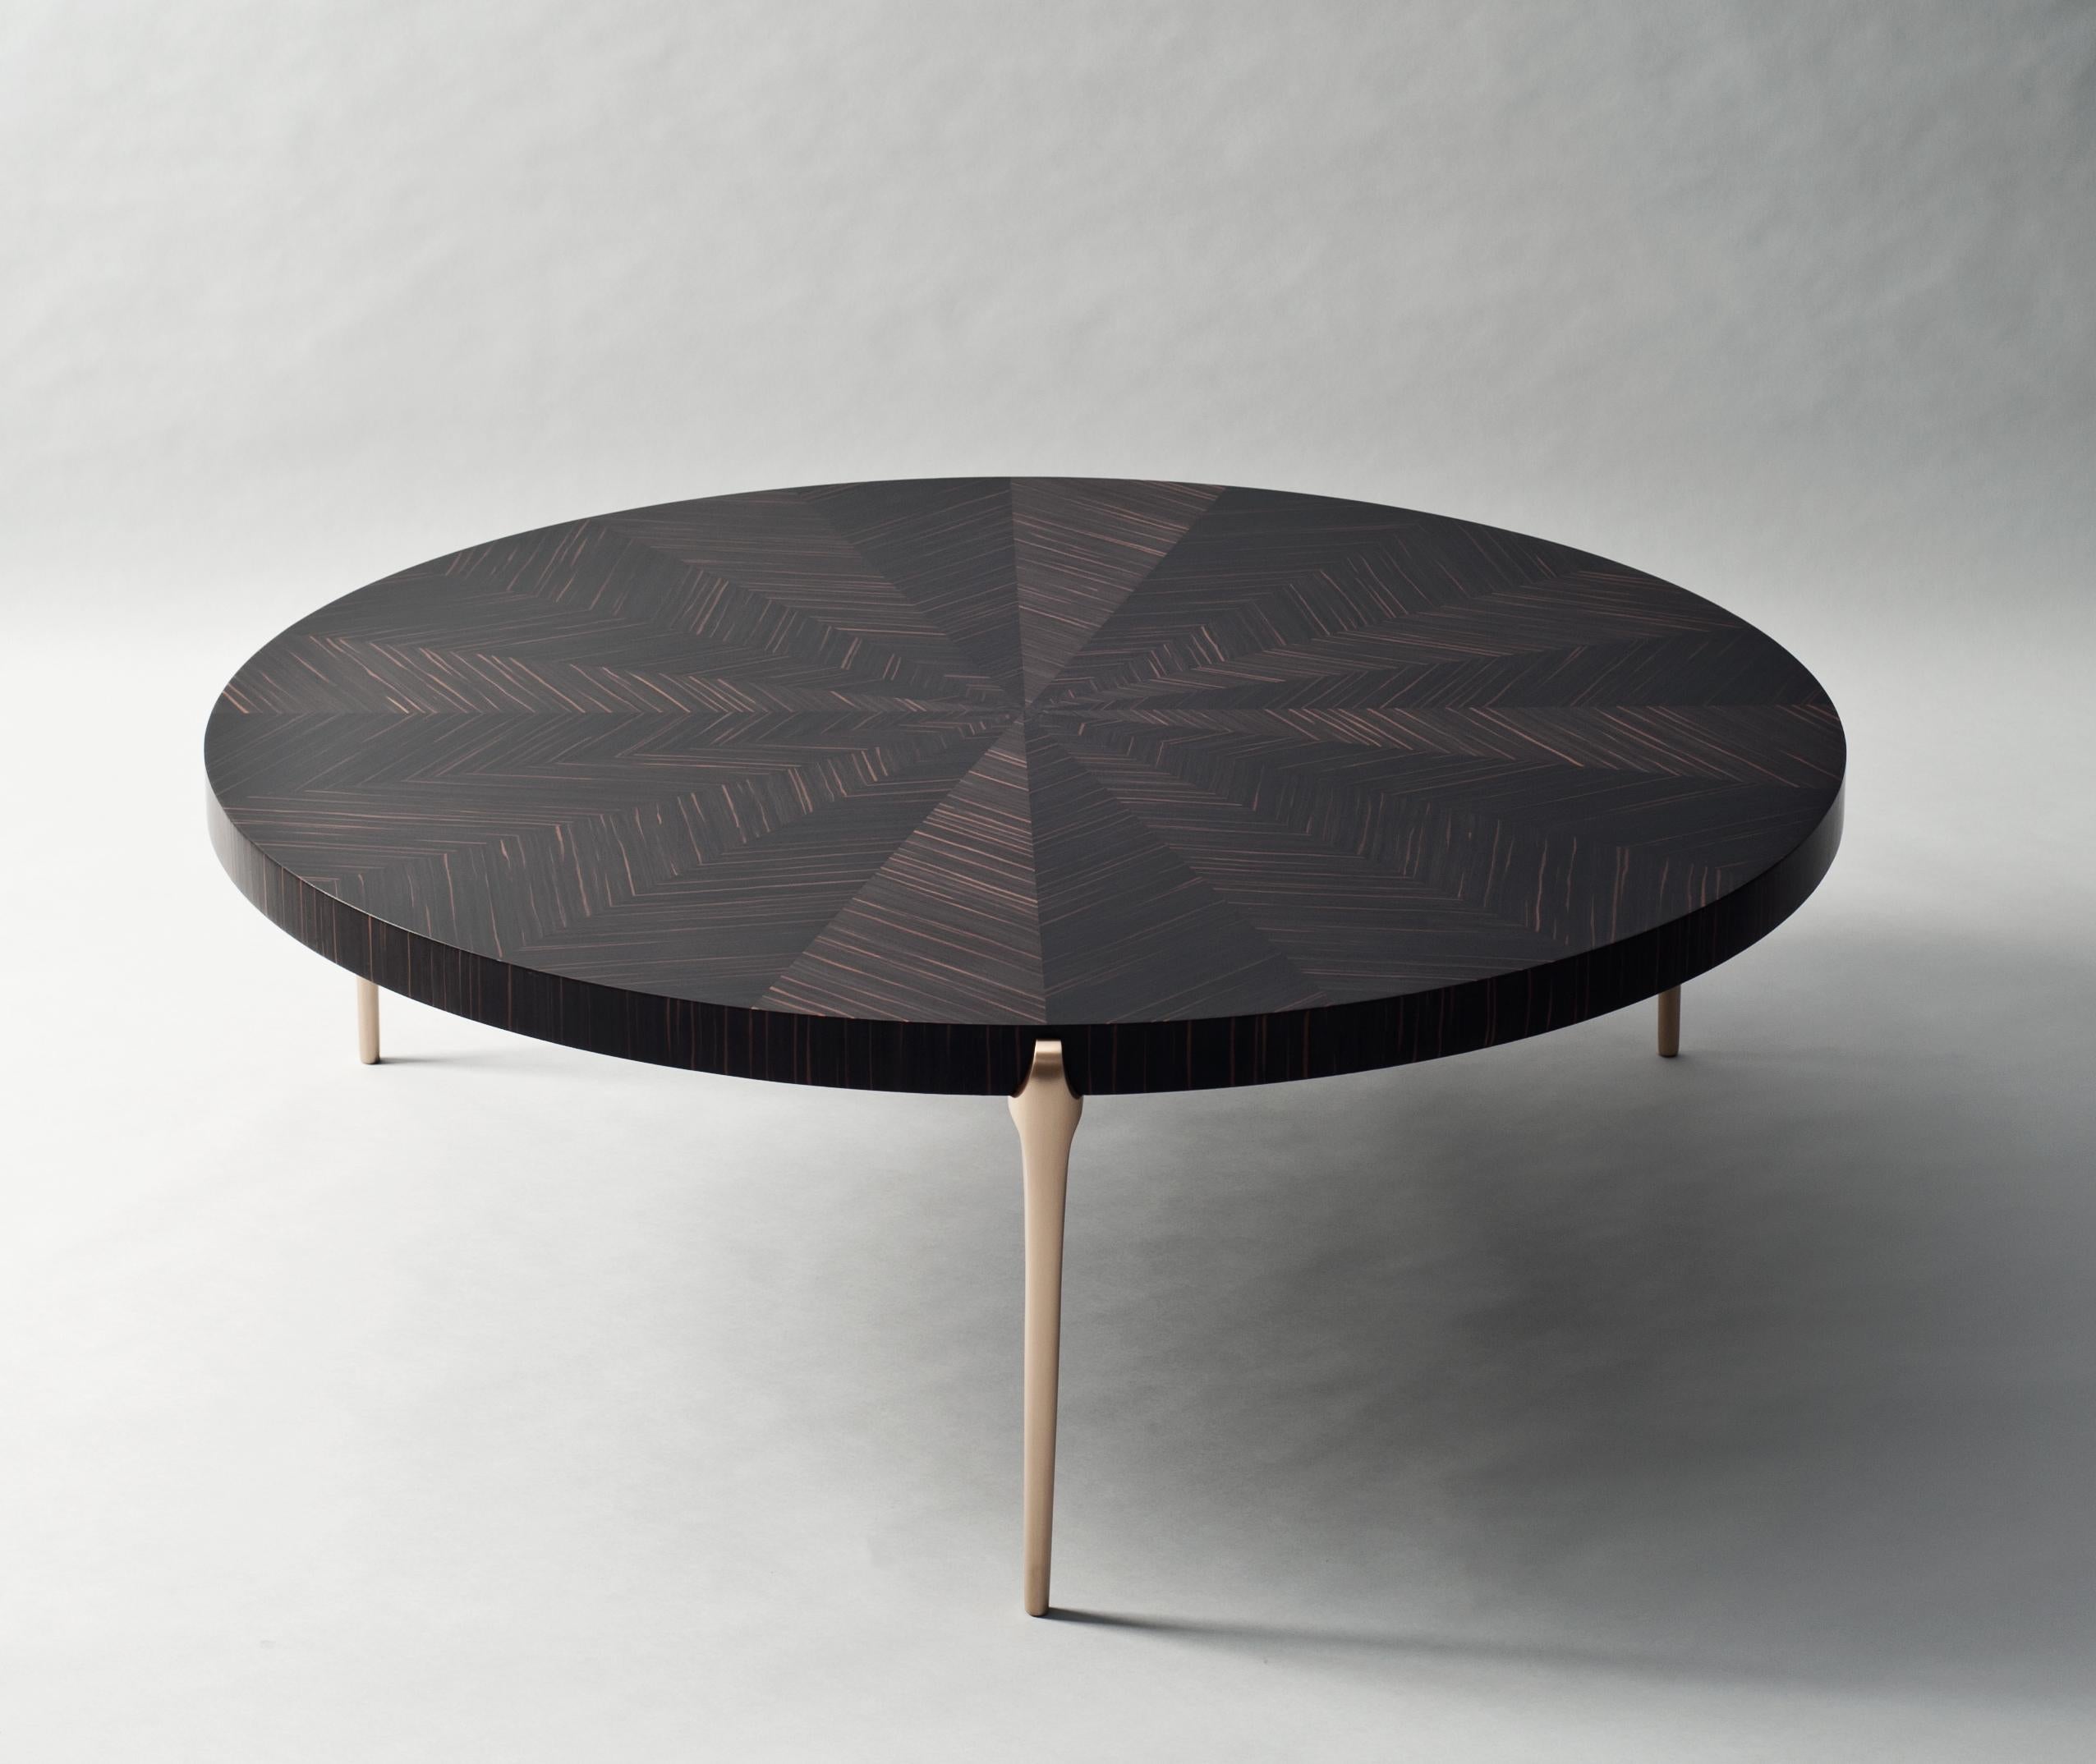 Acantha coffee table by DeMuro Das
Dimensions: W 120 x D 120 x H 41.1 cm
Materials: Matte Swiss ebony table top
Solid bronze - Satin legs
Dimensions and finishes can be customized.
DeMuro Das is an international design firm and the aesthetic and